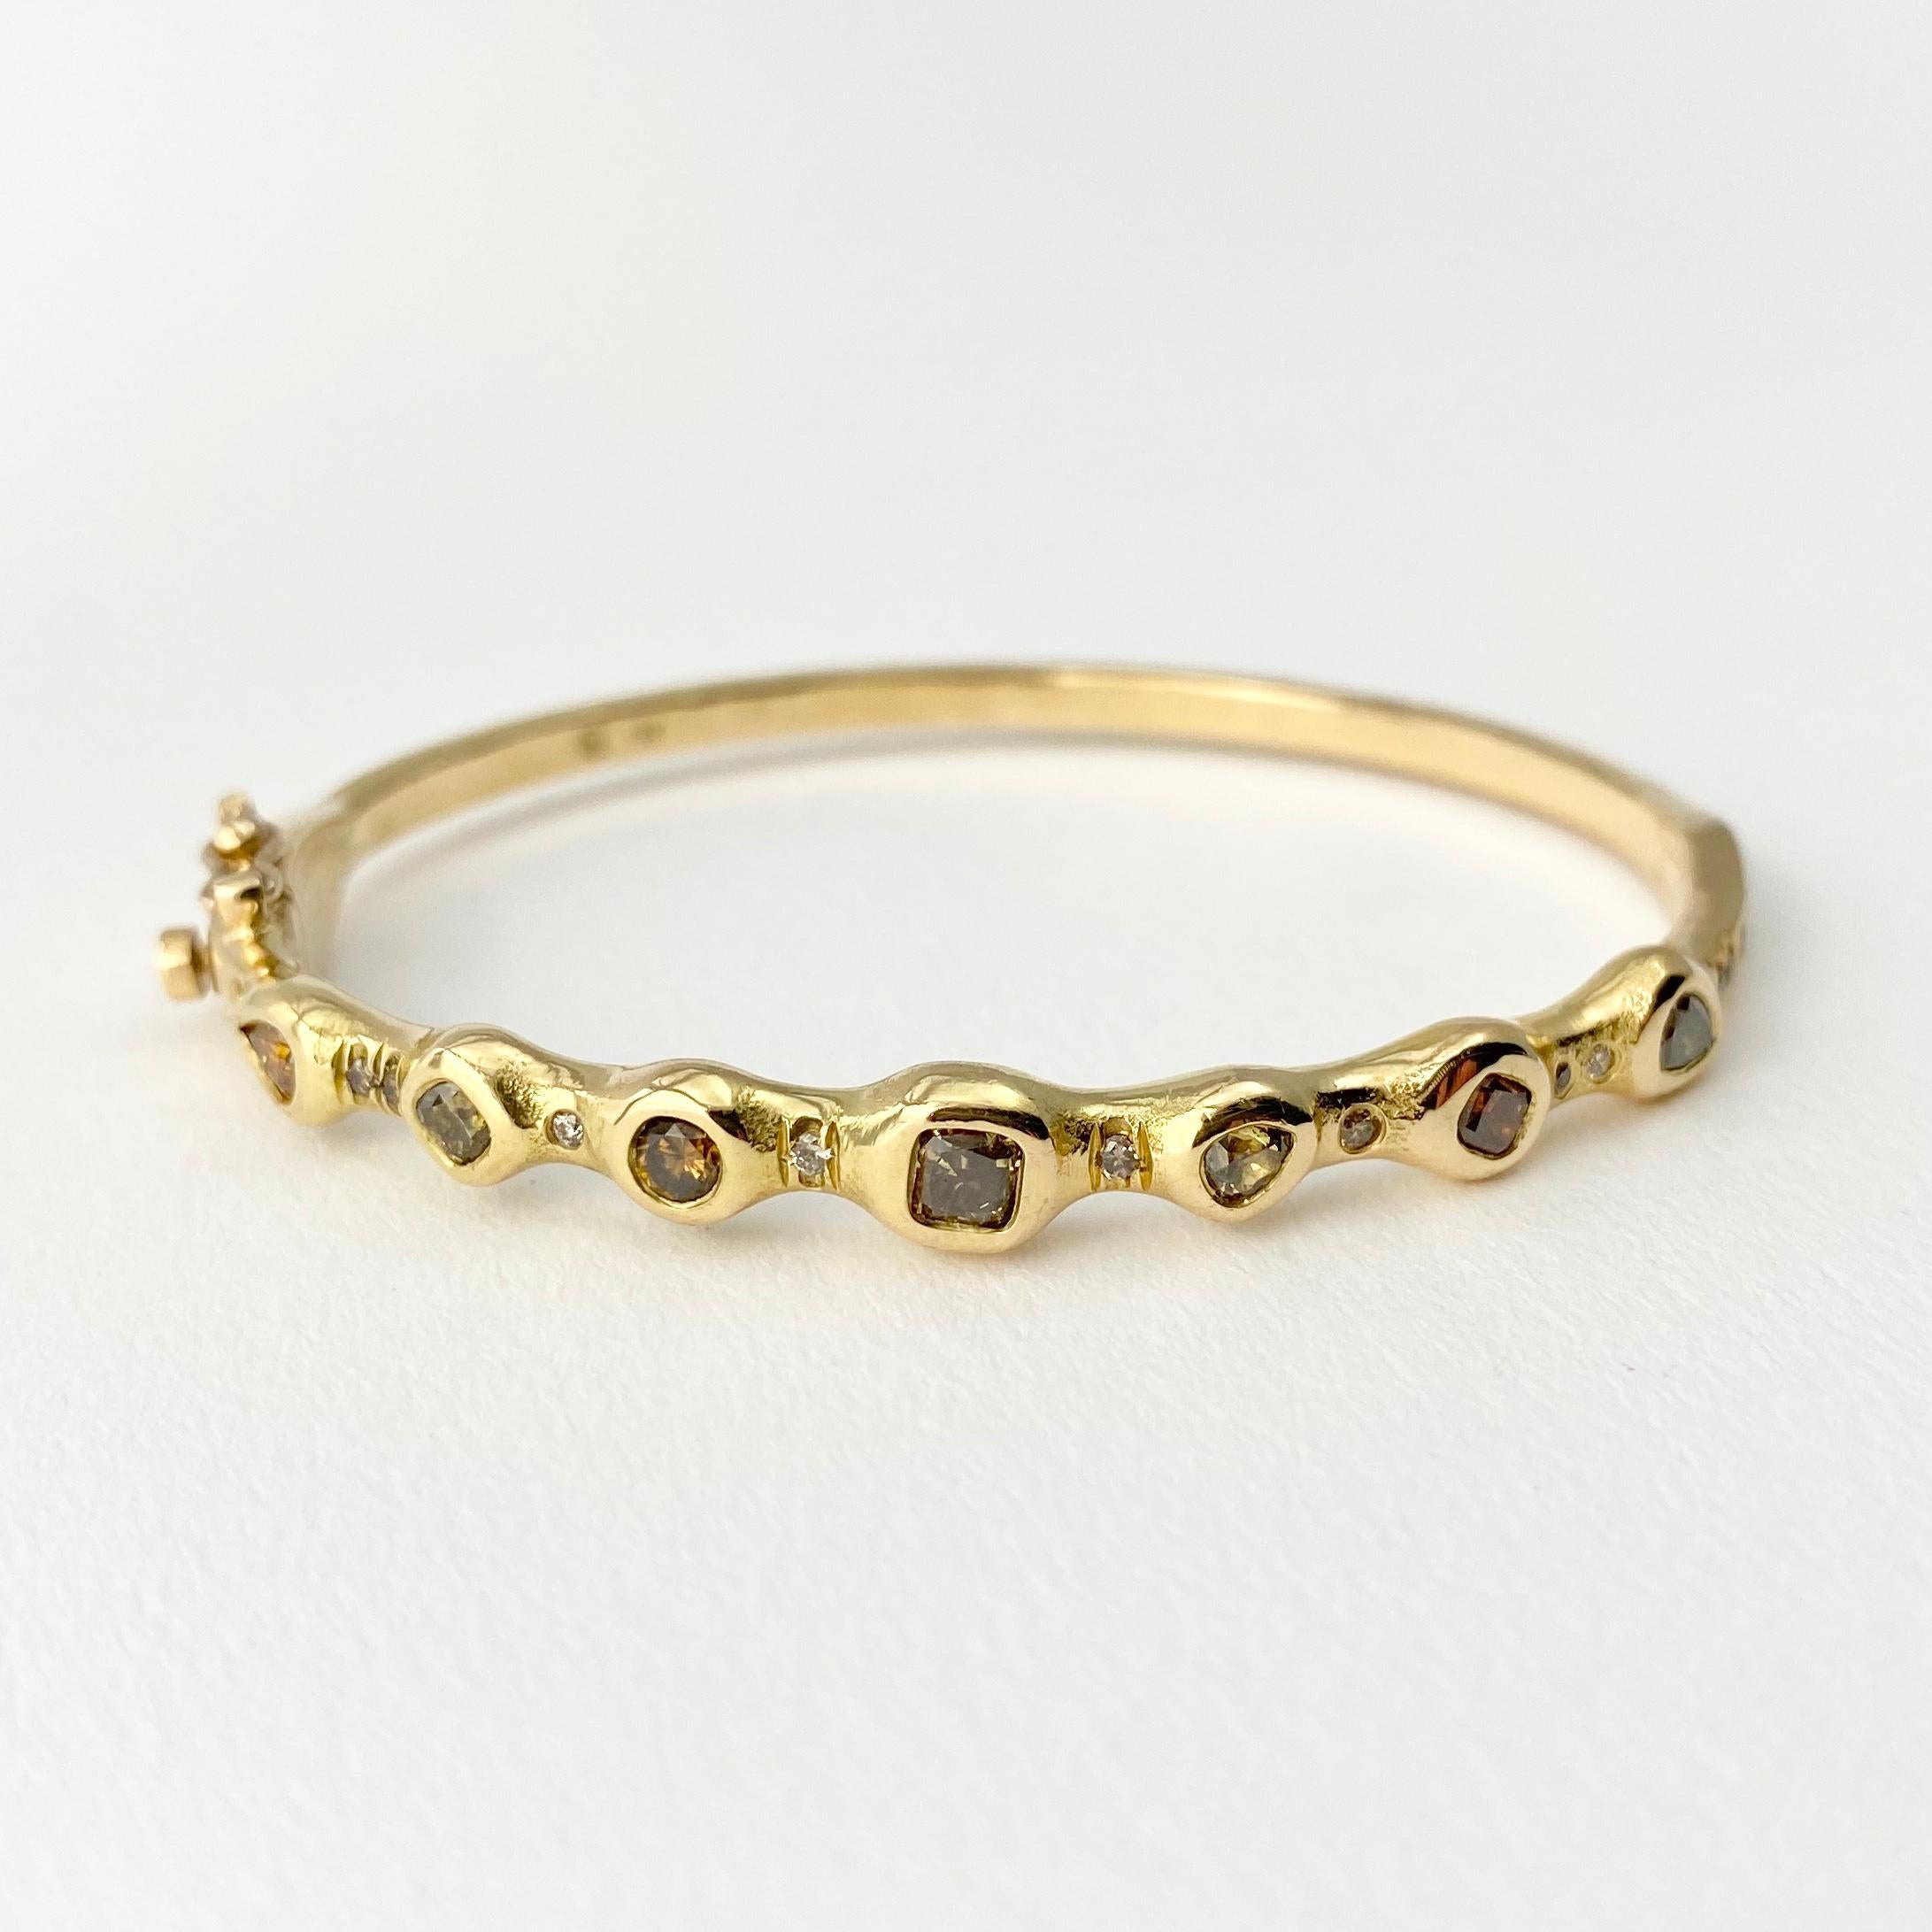 The Stepping Stone hinged bangle bracelet, from our Barefoot Collection, is hand-crafted with 18-karat recycled yellow gold, and features seven bezel set, colored diamonds in various sizes (three cushion shape, three pear, and one round); and 13